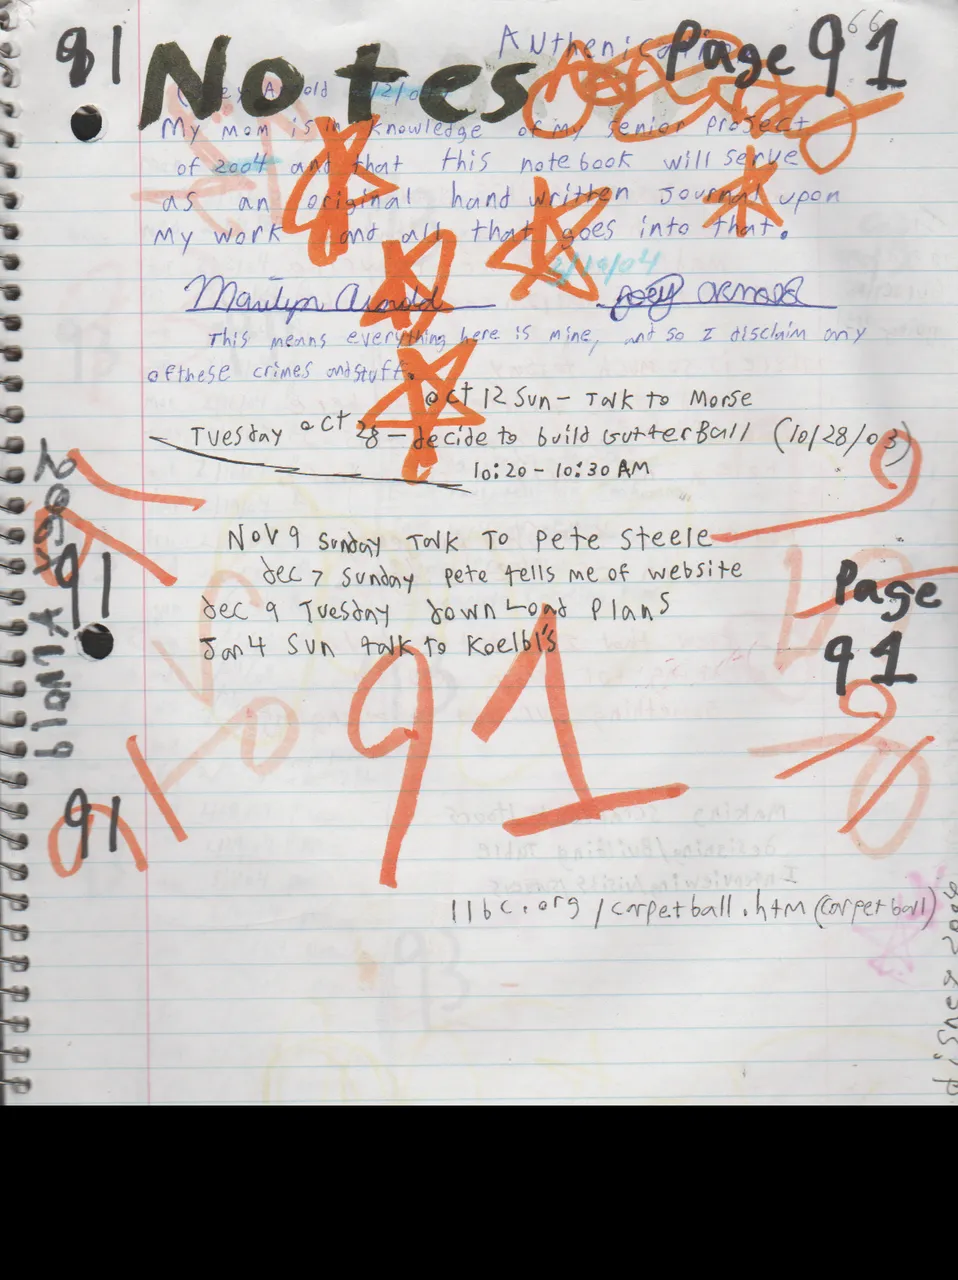 2004-01-29 - Thursday - Carpetball FGHS Senior Project Journal, Joey Arnold, Part 02, 96pages numbered, Notebook-89.png